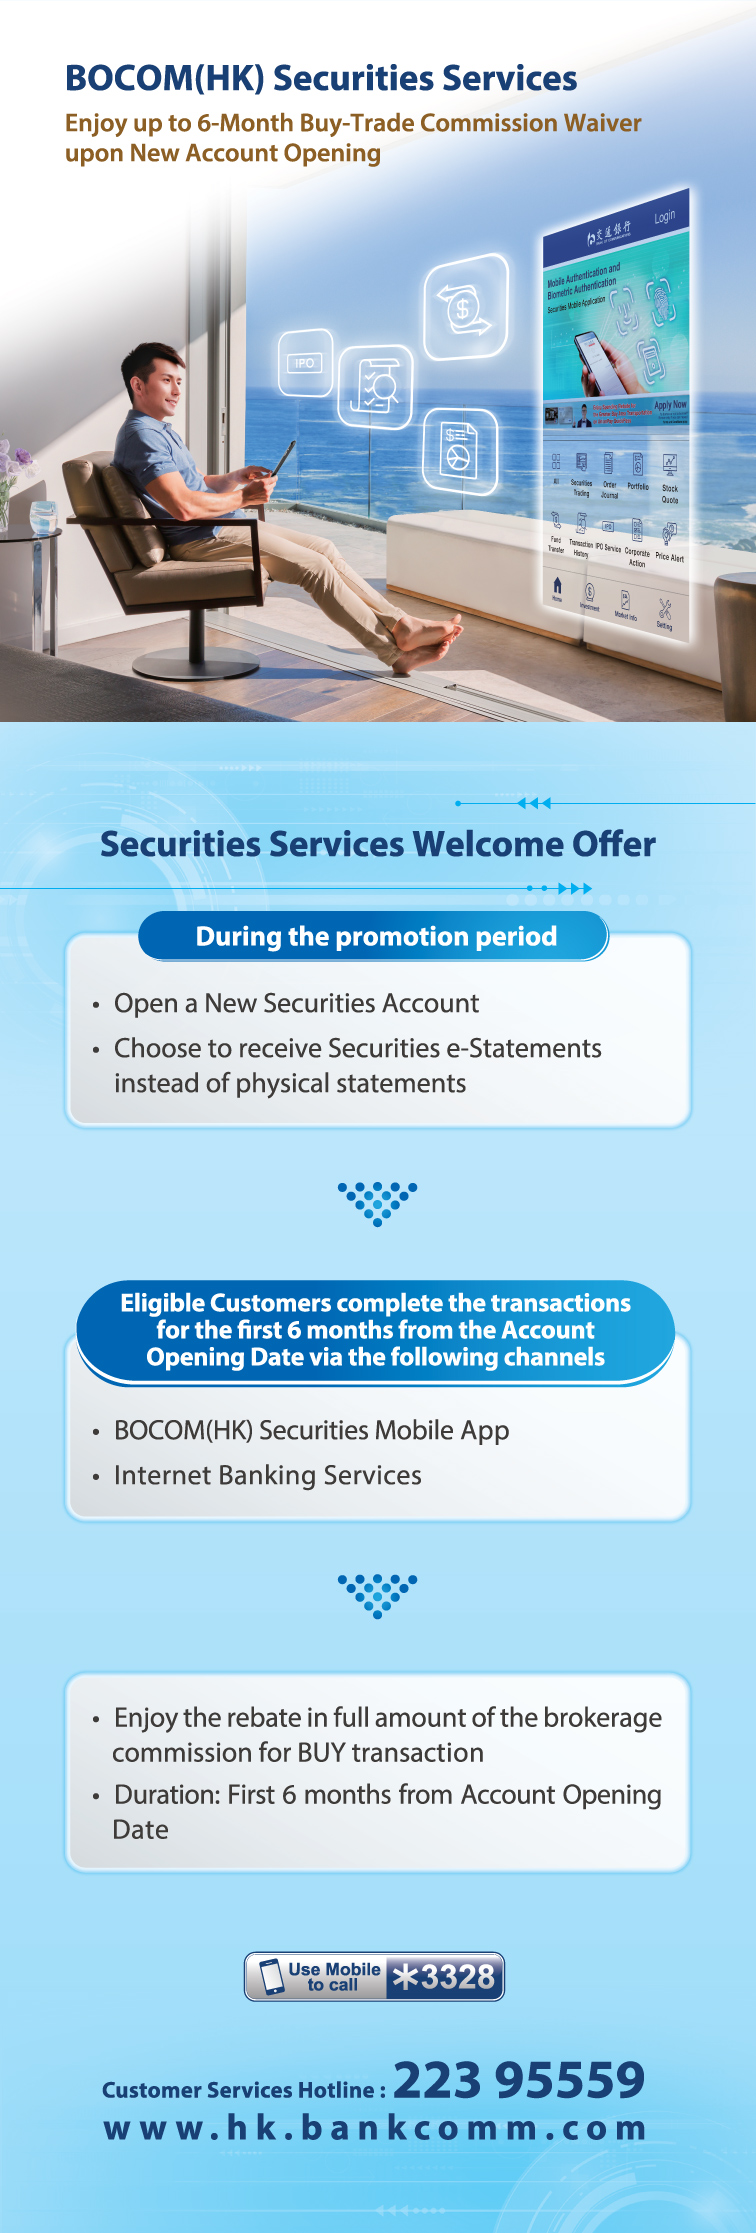 bocom(hk) securities services enjoy up to 6-month buy-trade commission waiver upon new account opening securities services welcome offer  during the promotion period • open a new securities account • choose to receive securities e-statements instead of physical statements  eligible customers complete the transactions for the first 6 months from the account opening date via the following channels • bocom(hk) securities mobile app • internet banking services  • enjoy the rebate in full amount of the brokerage commission for buy transaction • duration: first 6 months from account opening date  customer services hotline : 223 95559 www.hk.bankcomm.com